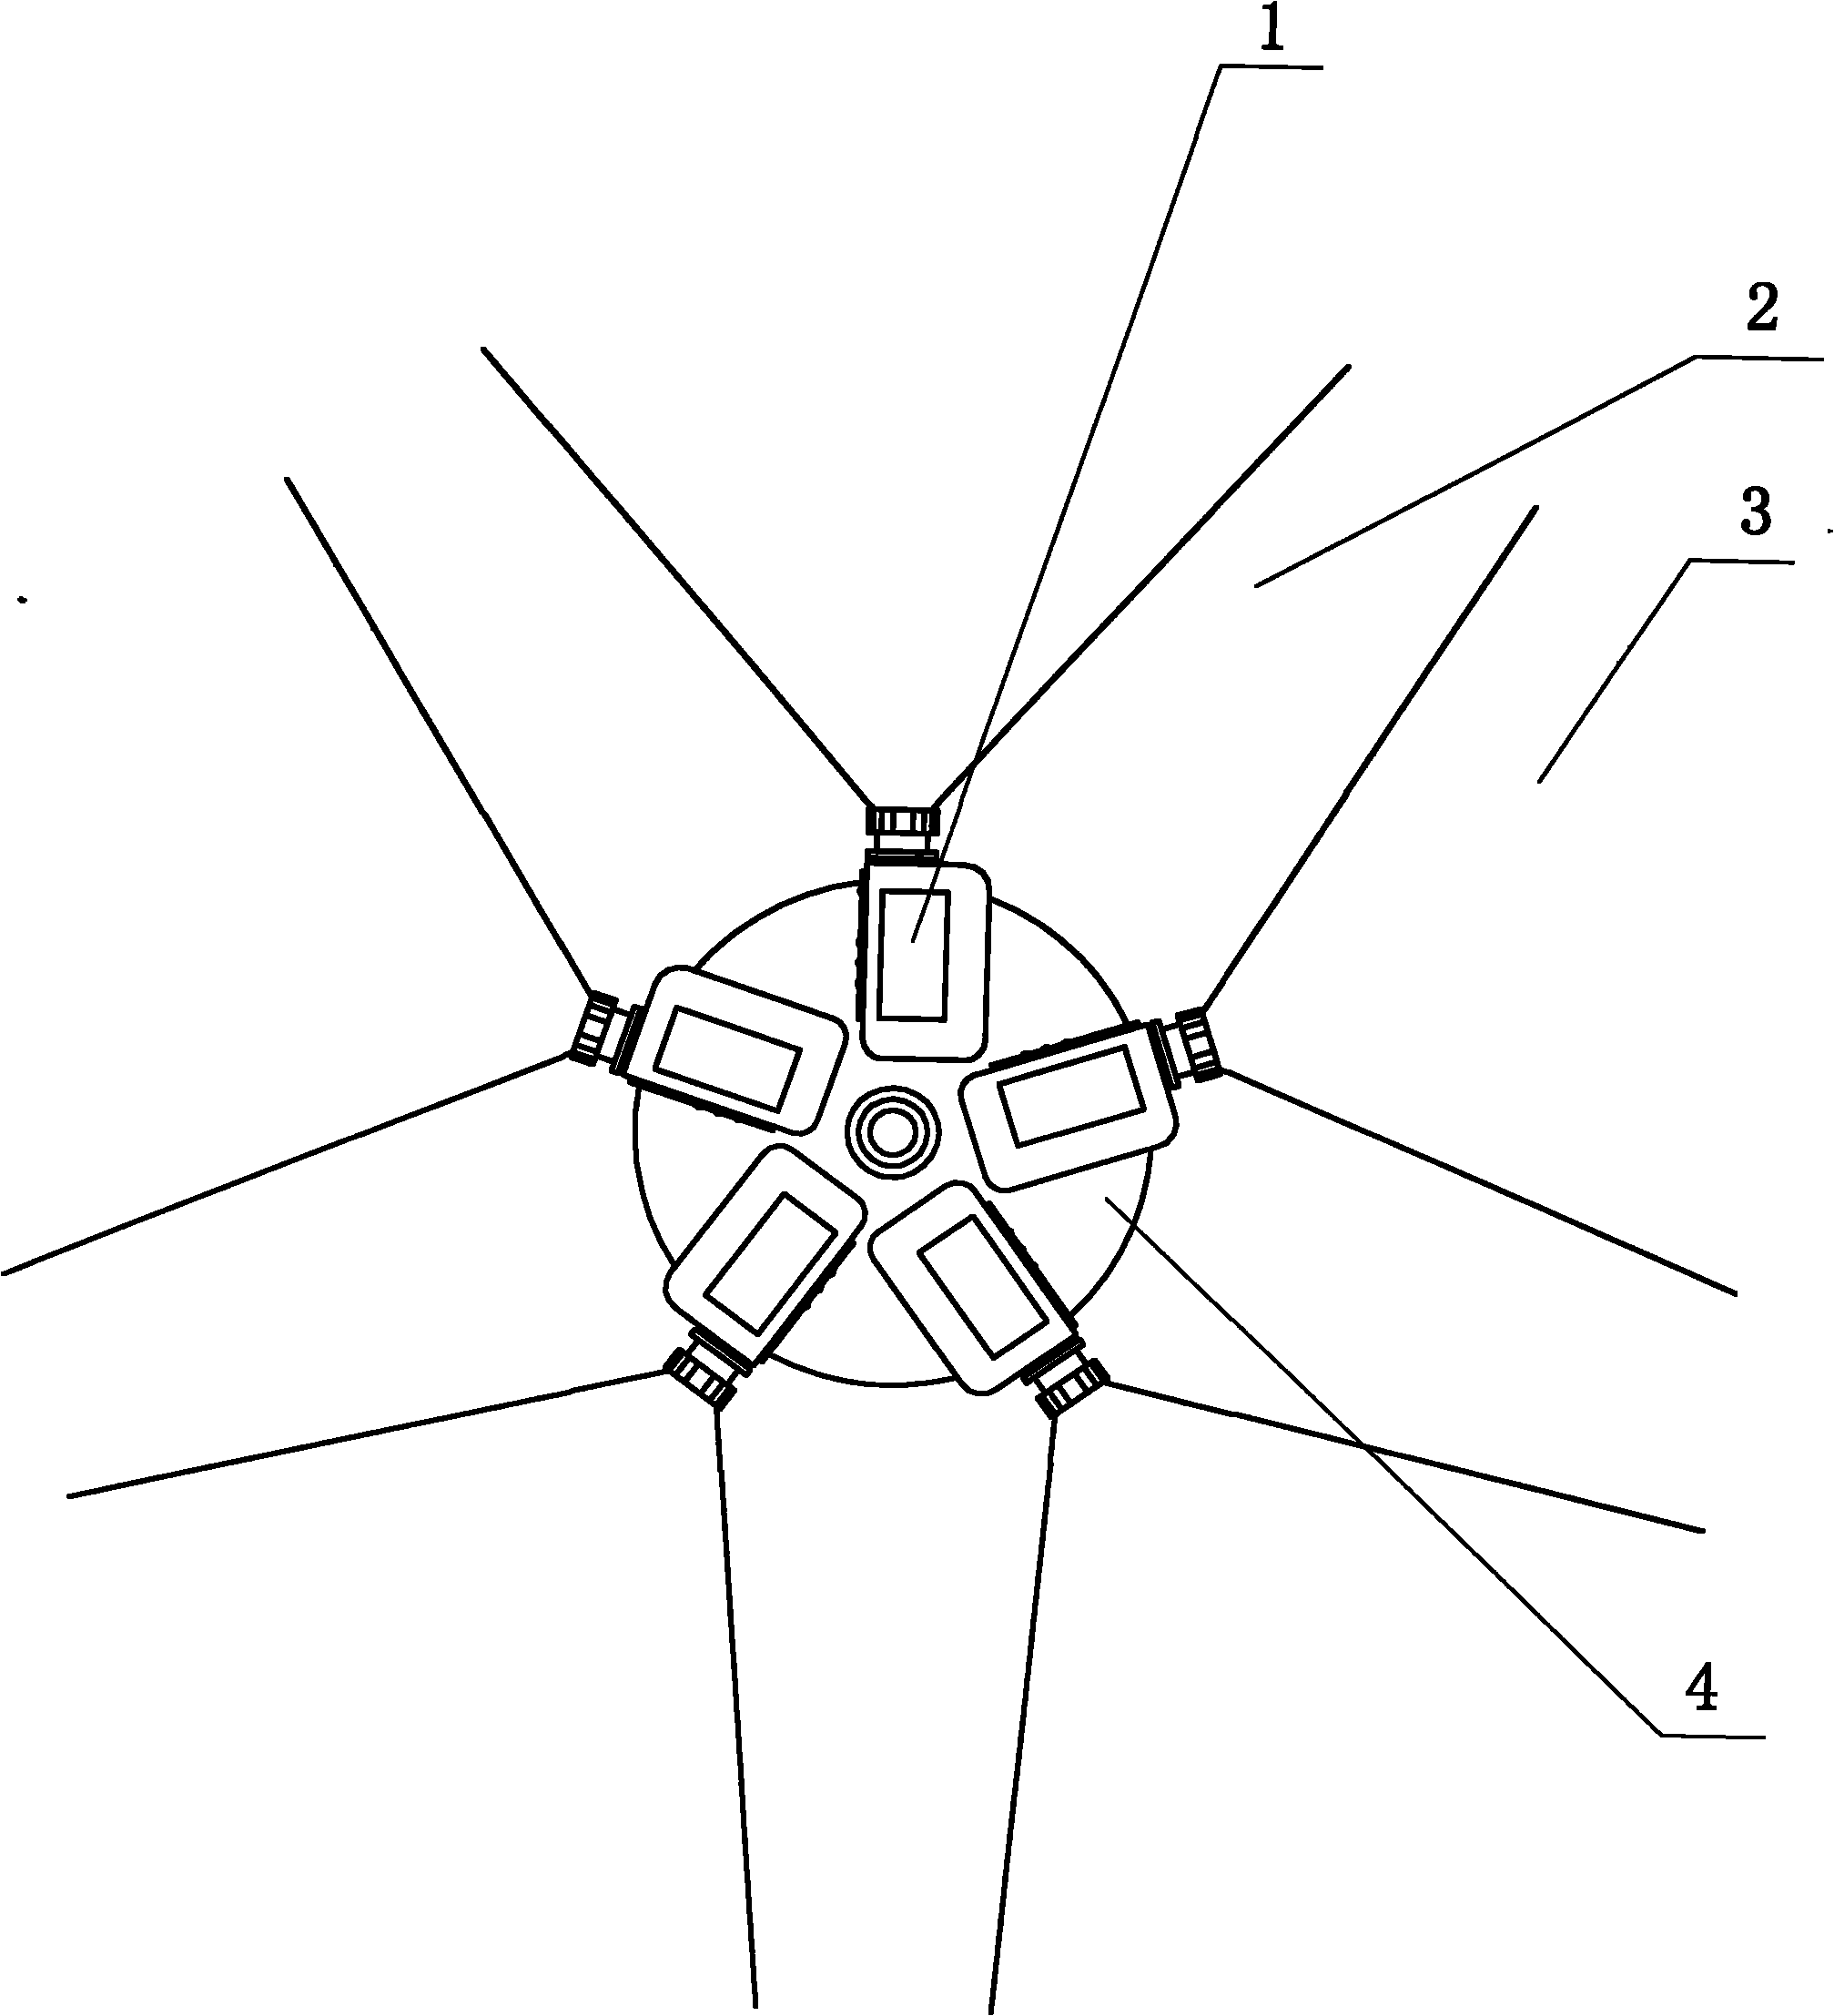 Small-diameter head structure with cameras